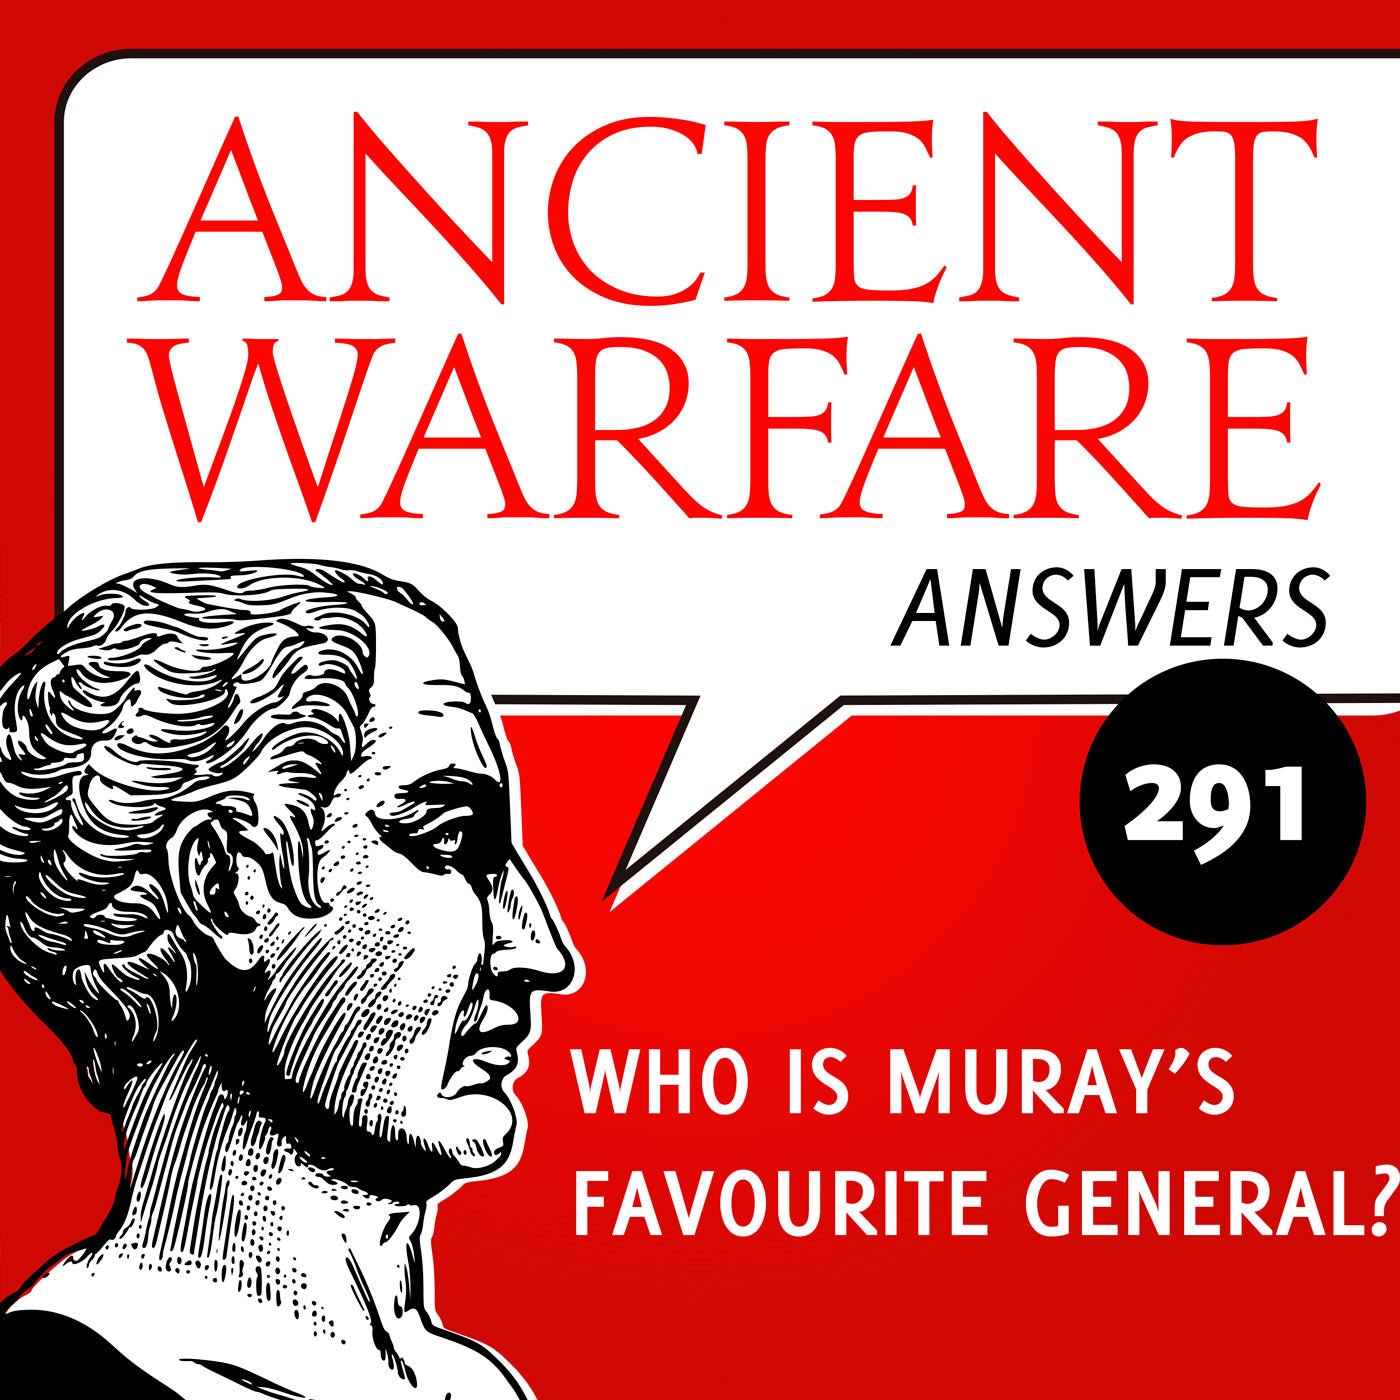 Ancient Warfare Answers (291): Who is Murray's Favourite General?